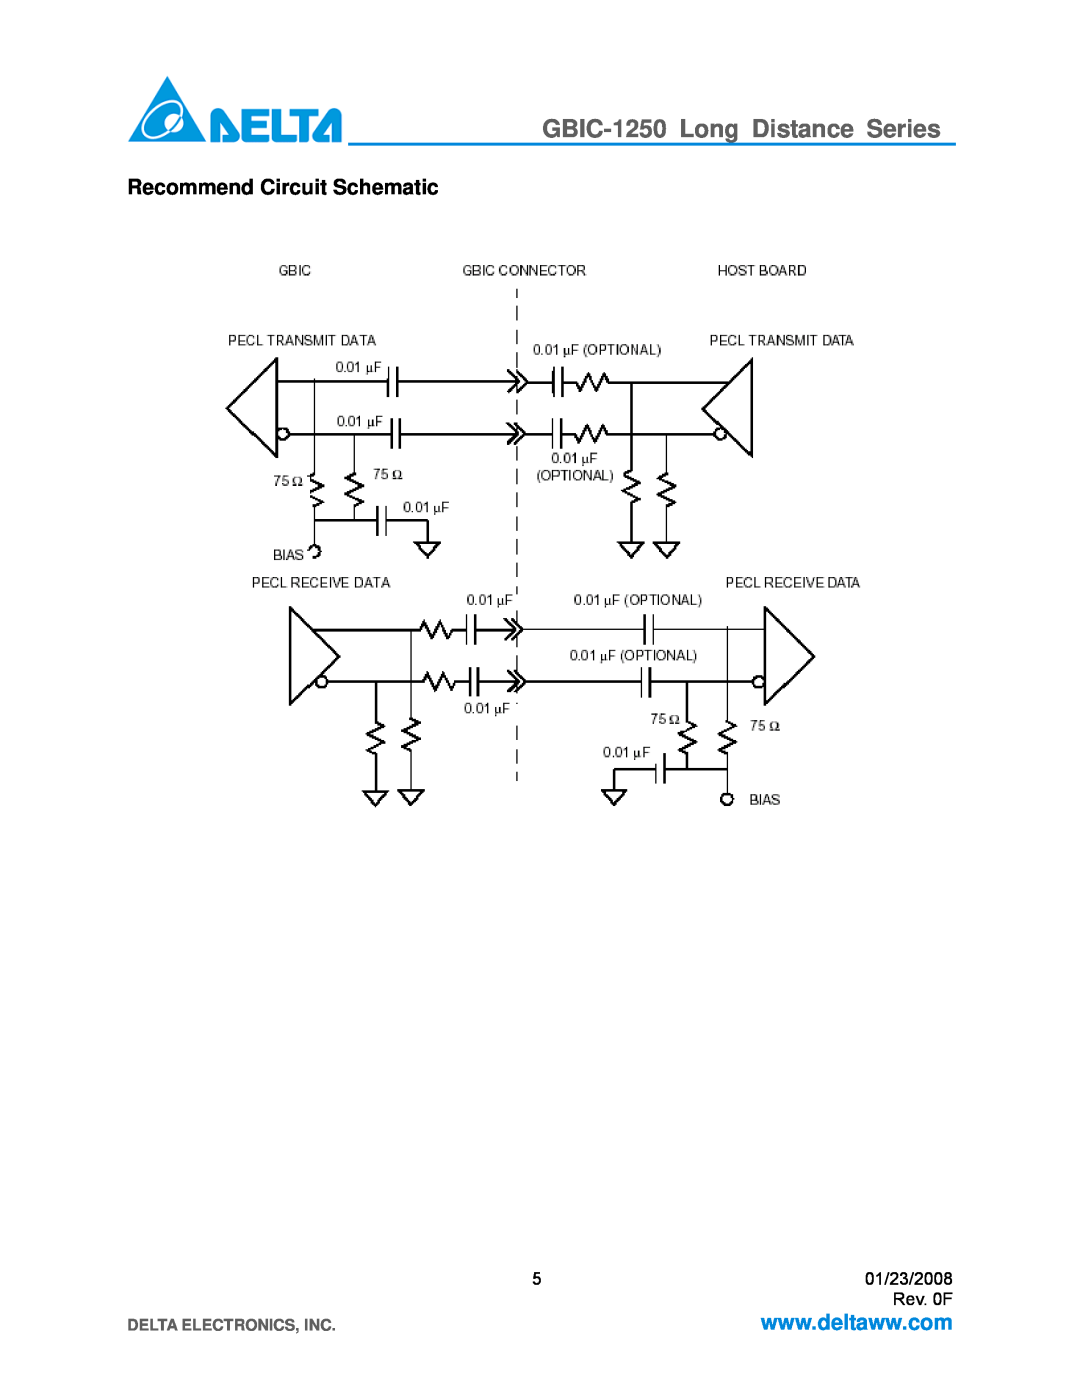 Delta Electronics GBIC-1250D5MR Recommend Circuit Schematic, GBIC-1250 Long Distance Series, Delta Electronics, Inc 